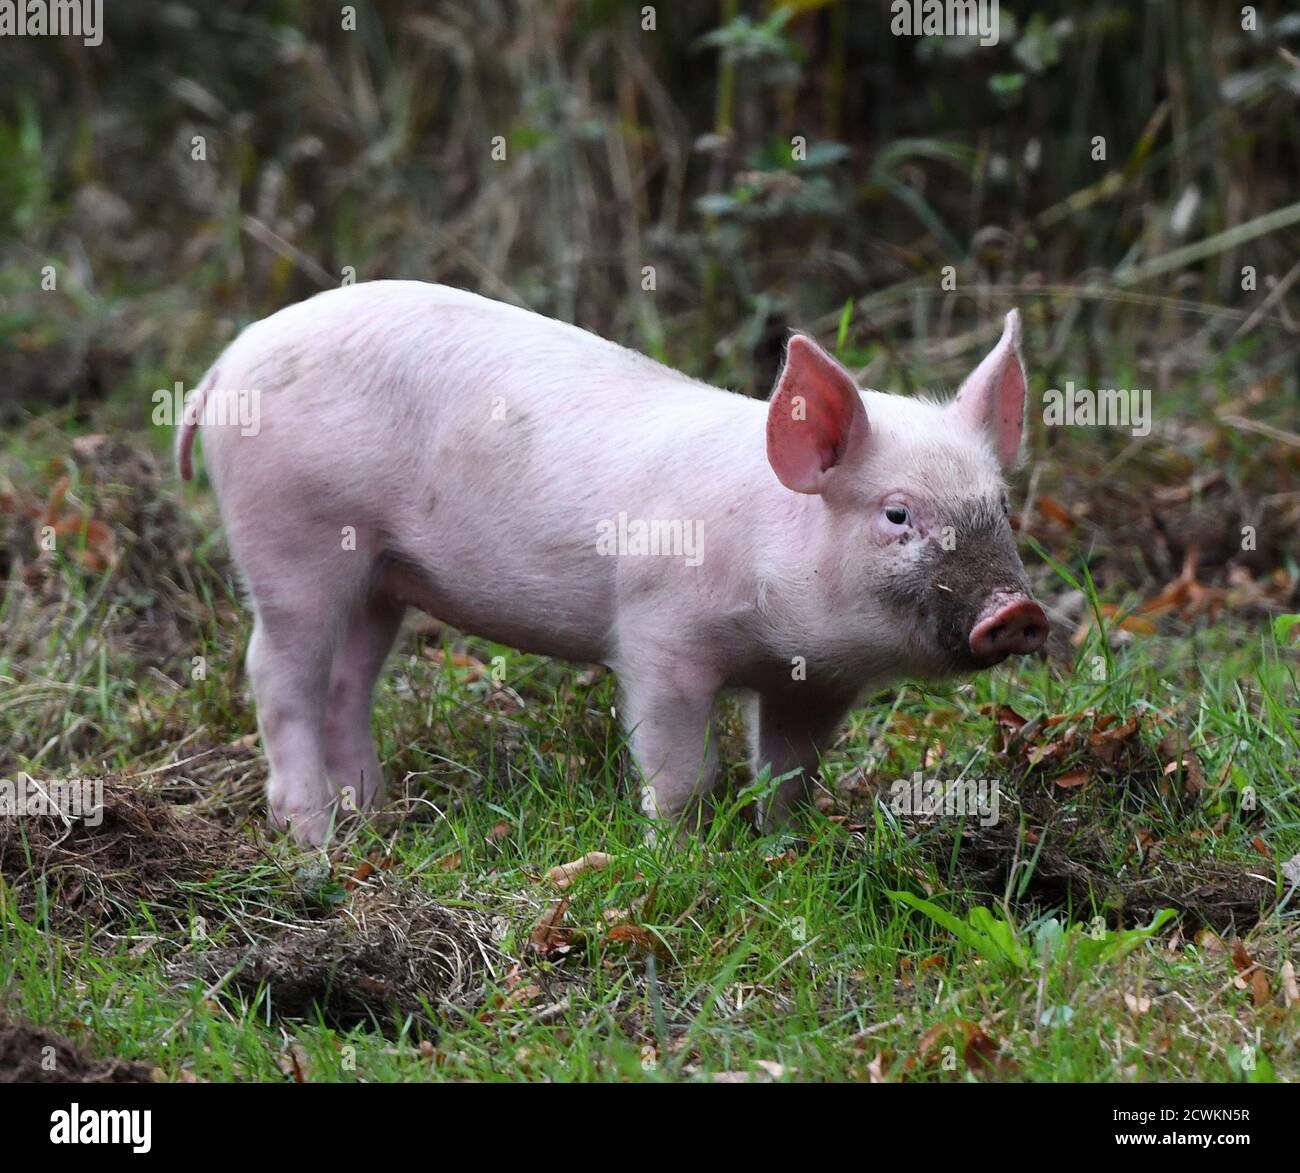 Piglet on a farm in England Stock Photo